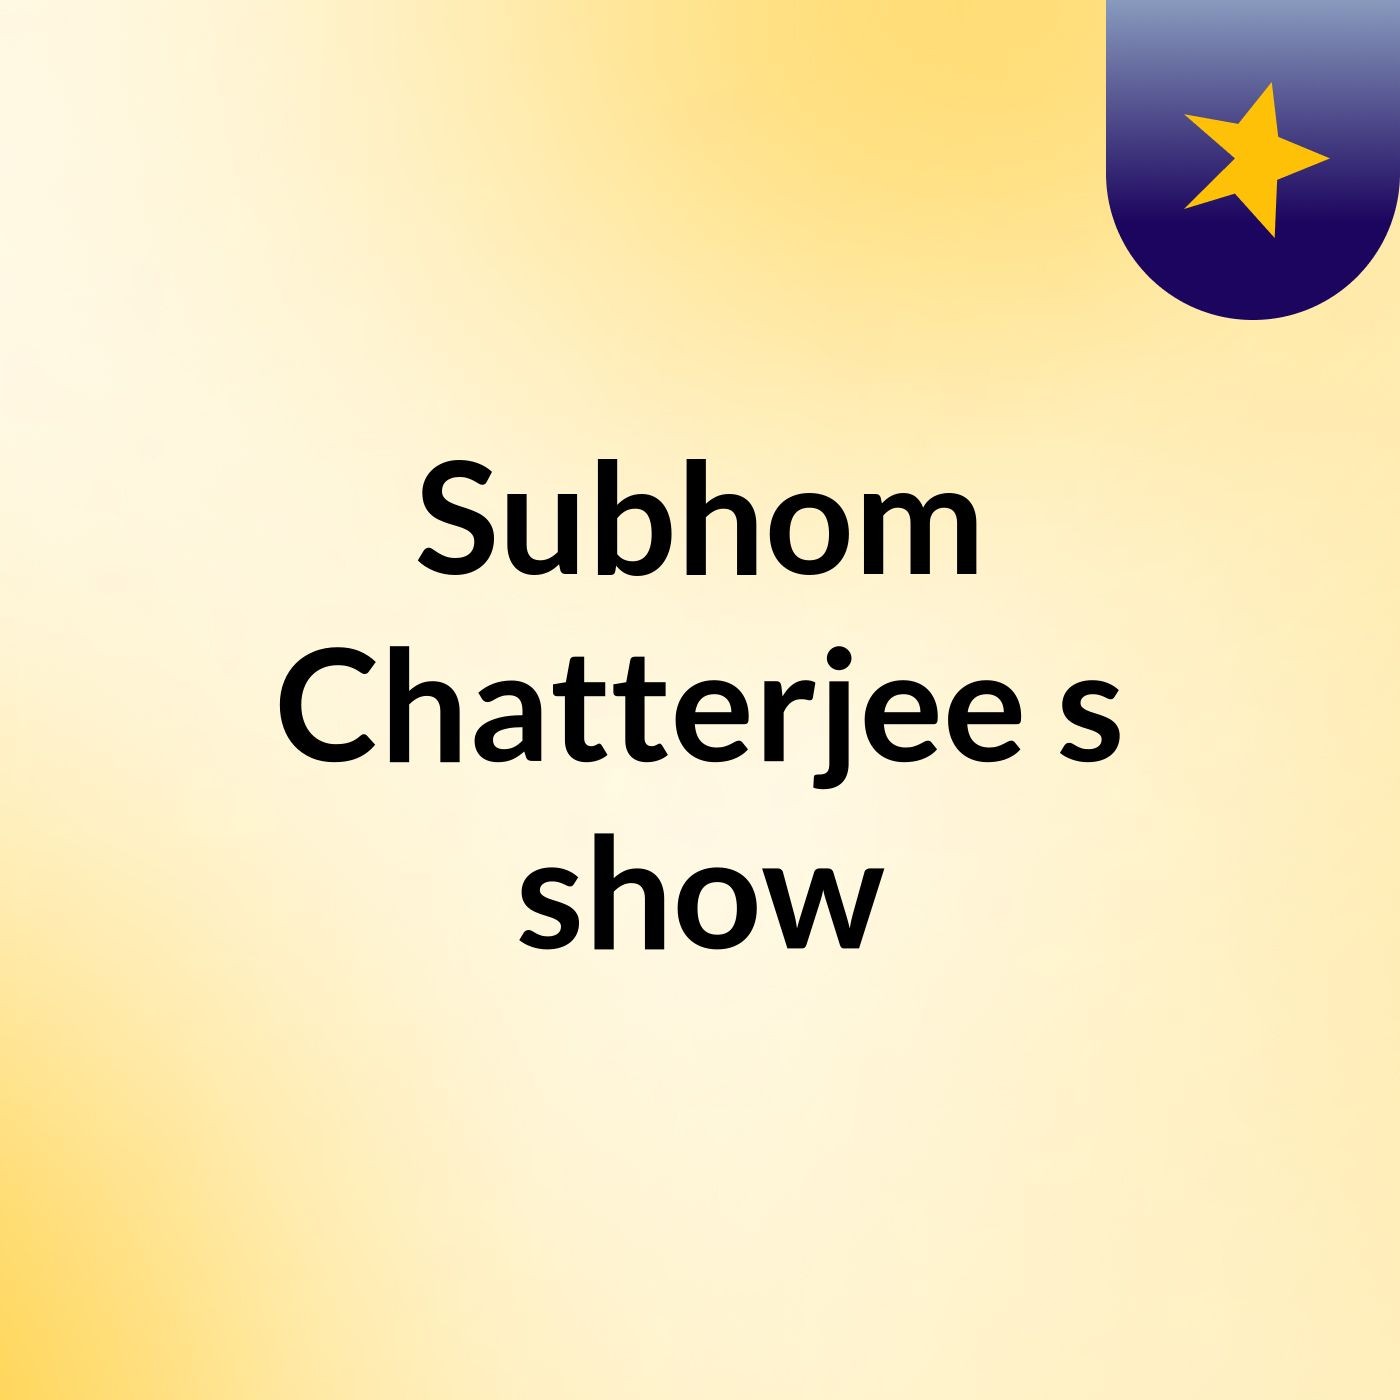 Subhom Chatterjee's show